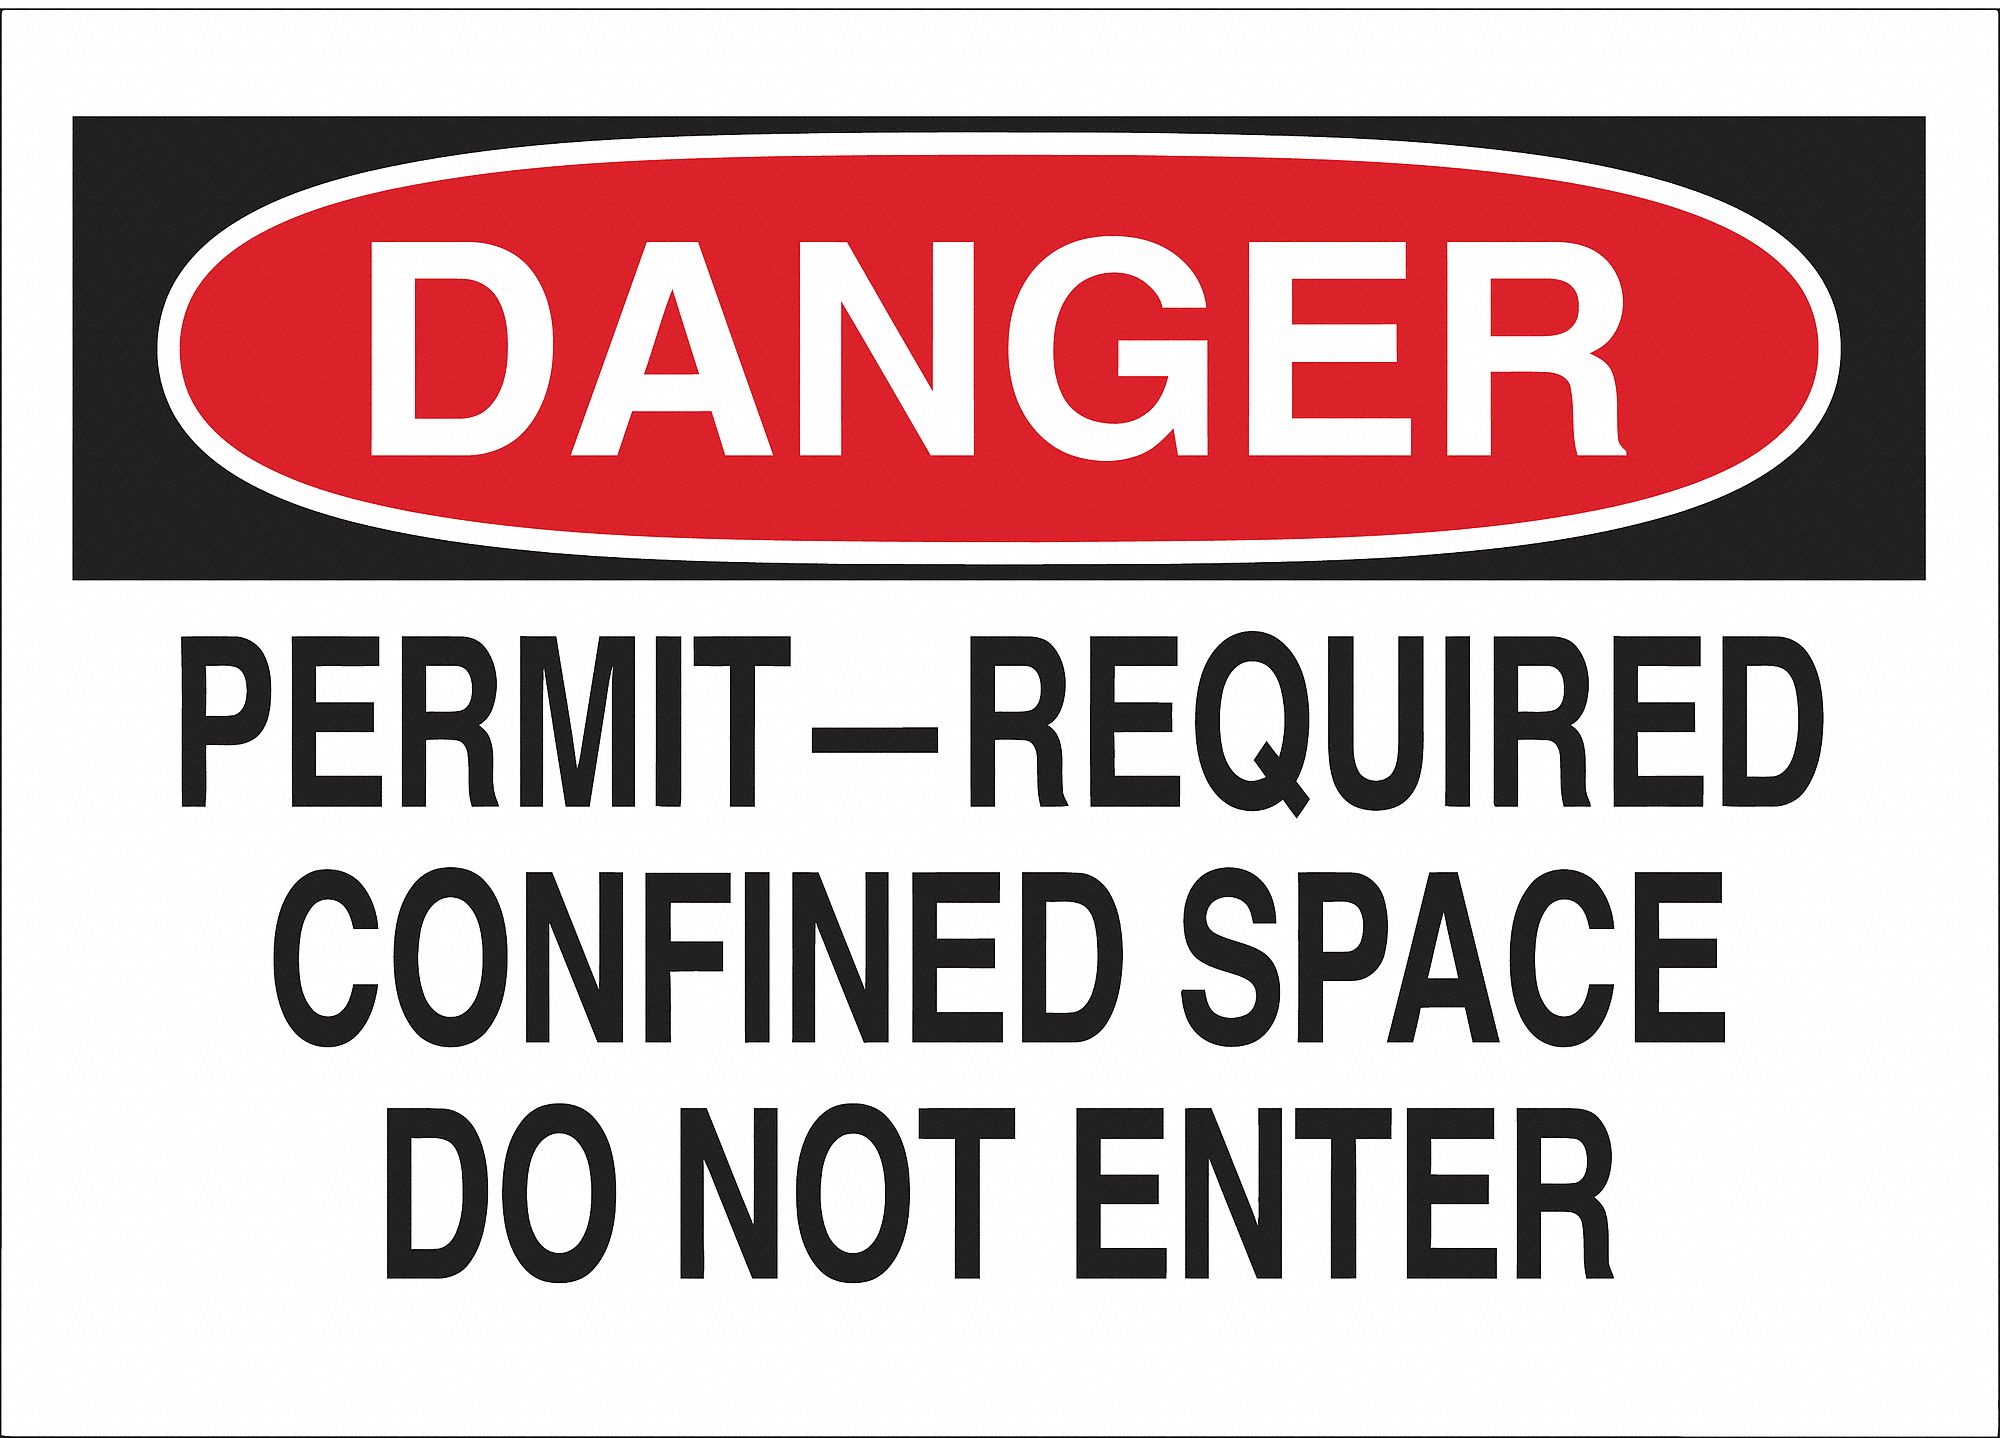 PERMIT REQUIRED DO NOT ENTER DANGER SIGN, MOUNTING HOLES, BLACK/RED/WHITE, 7X10IN, PLASTIC